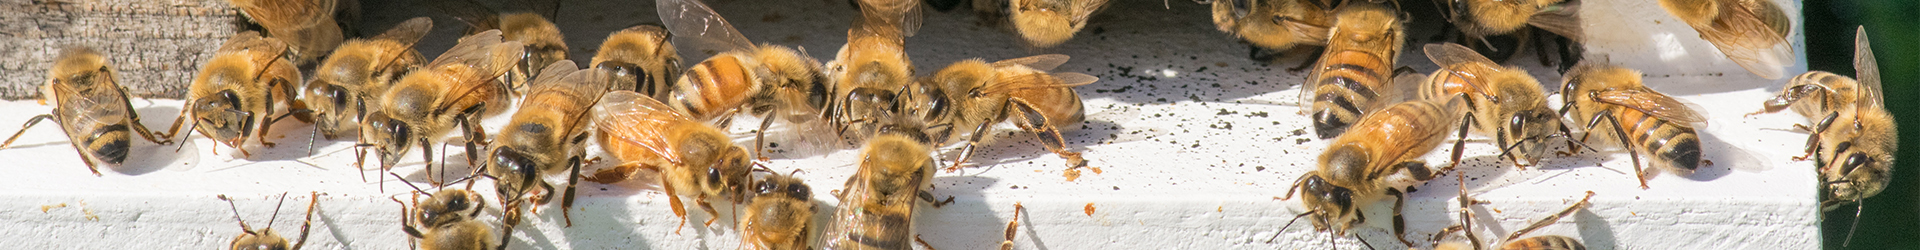 bees on bee hive header